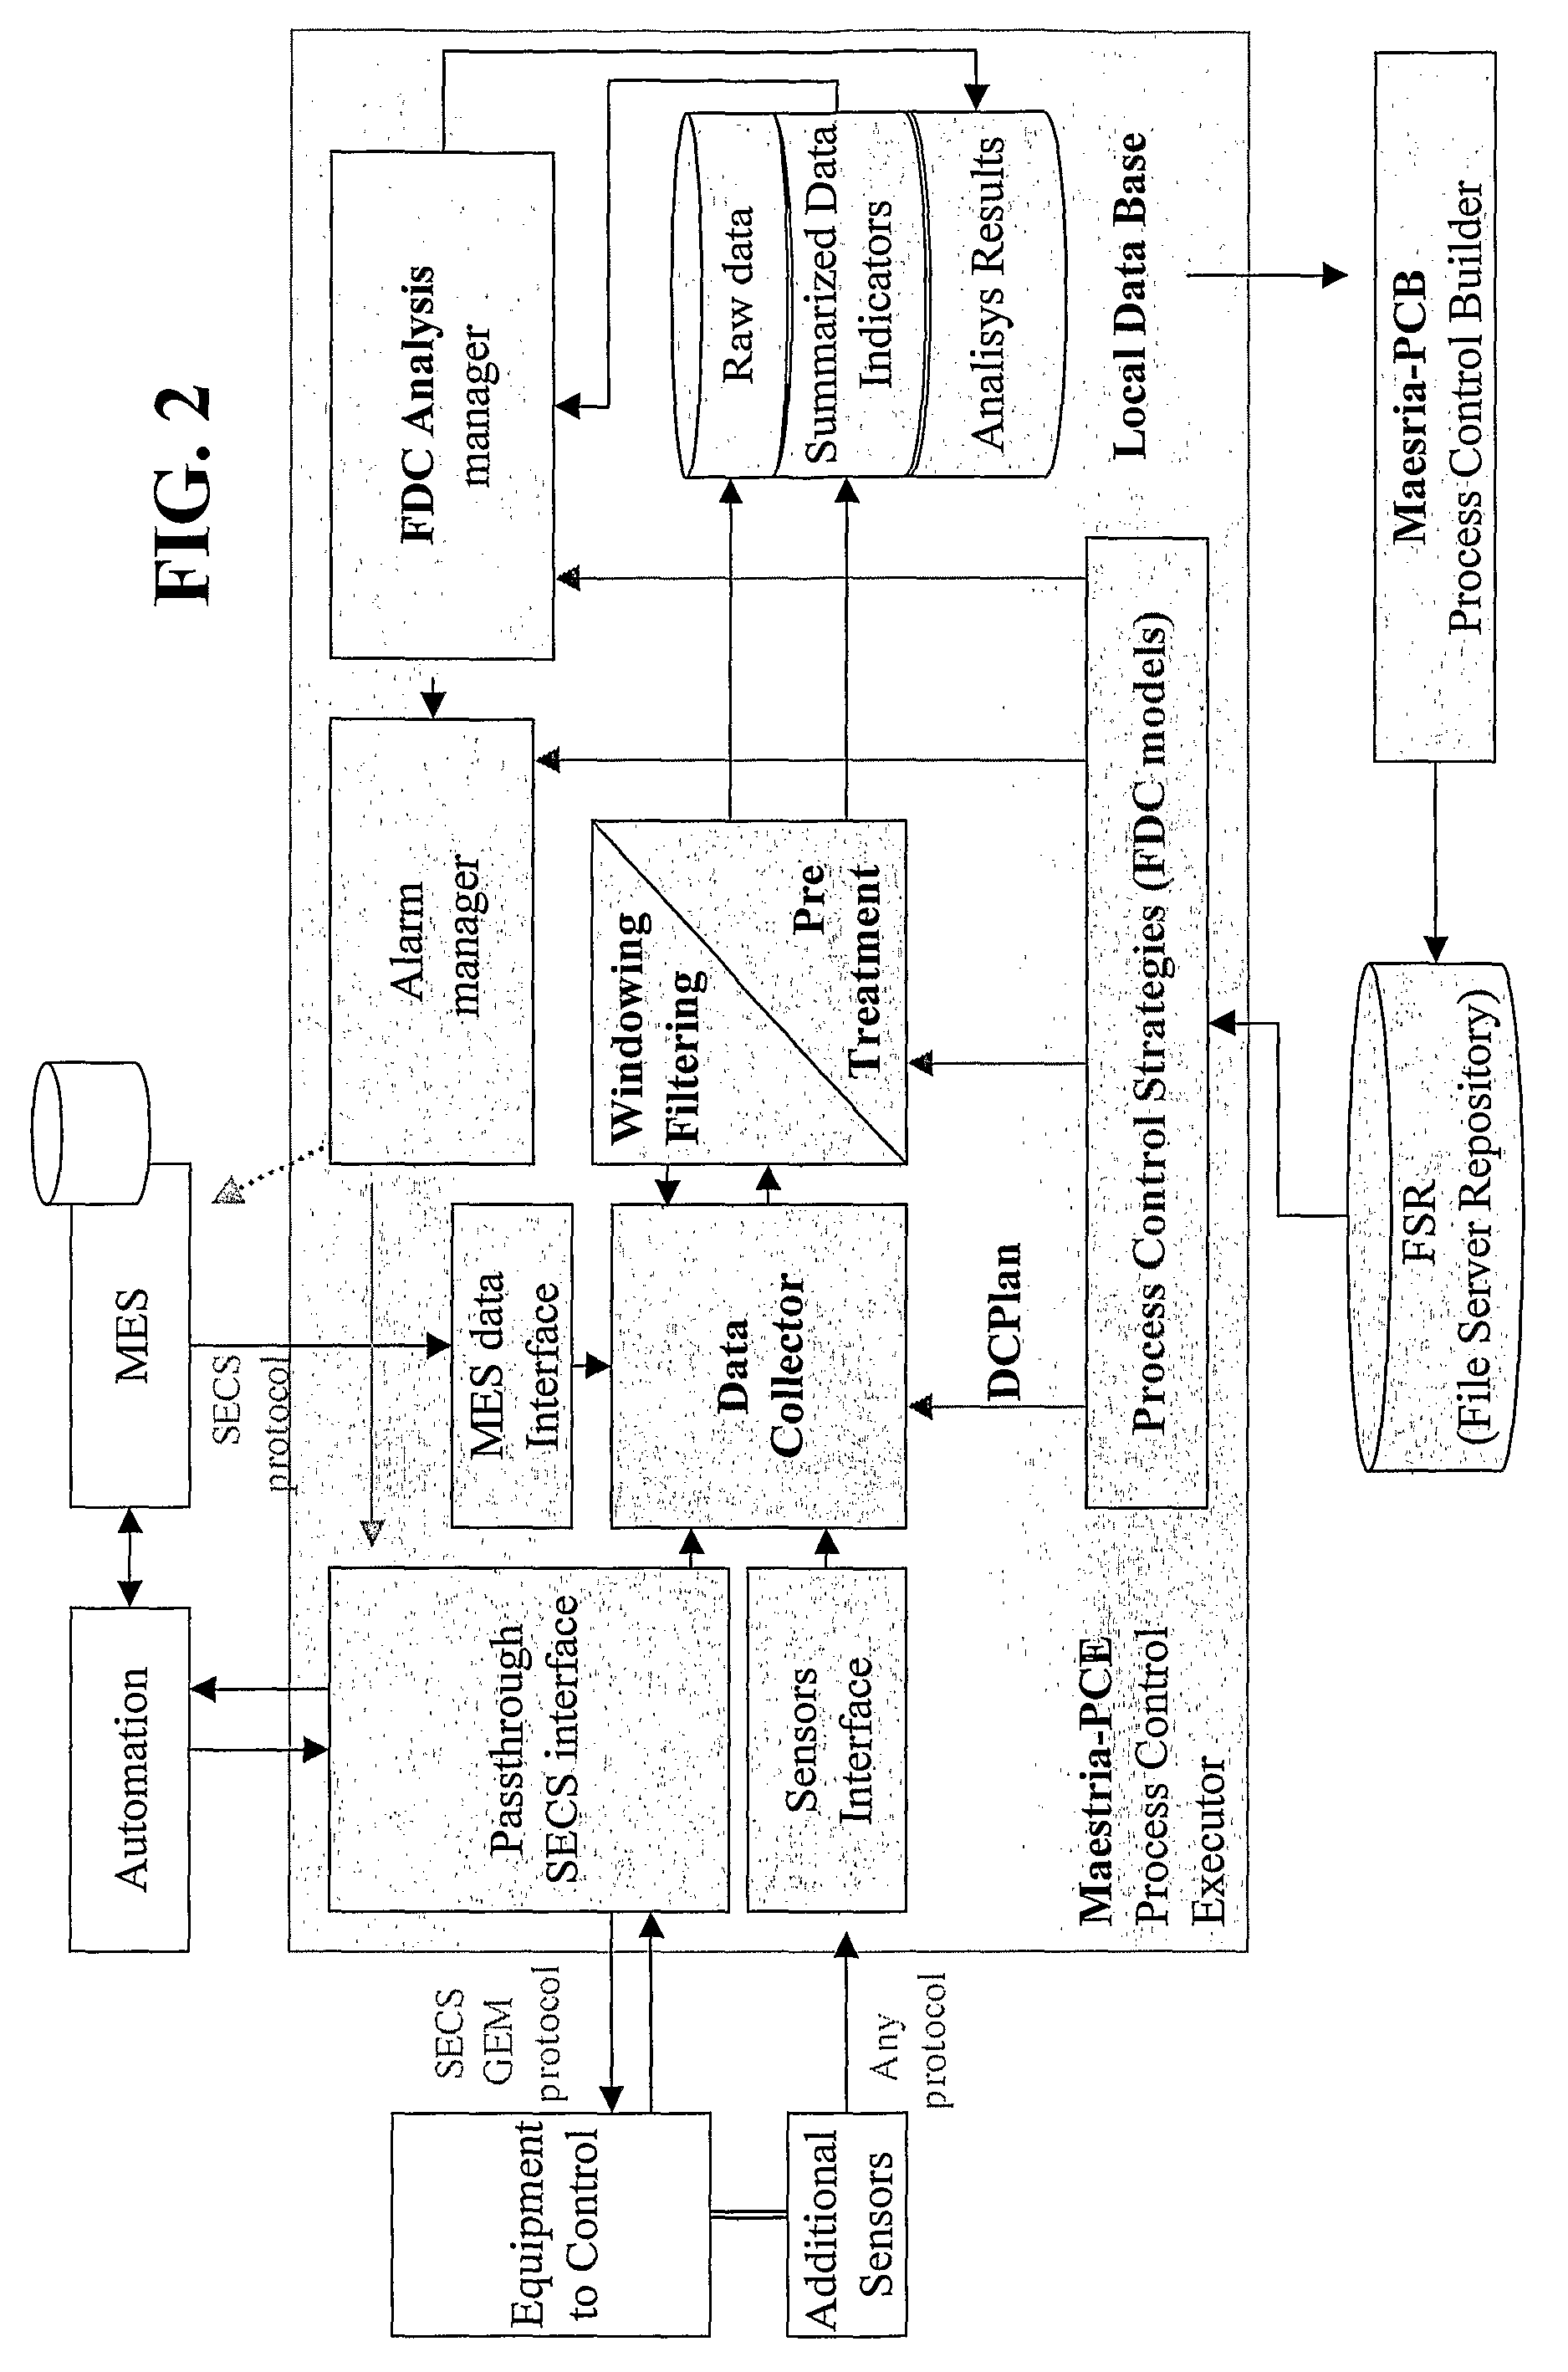 Method for evaluating the quality of data collection in a manufacturing environment